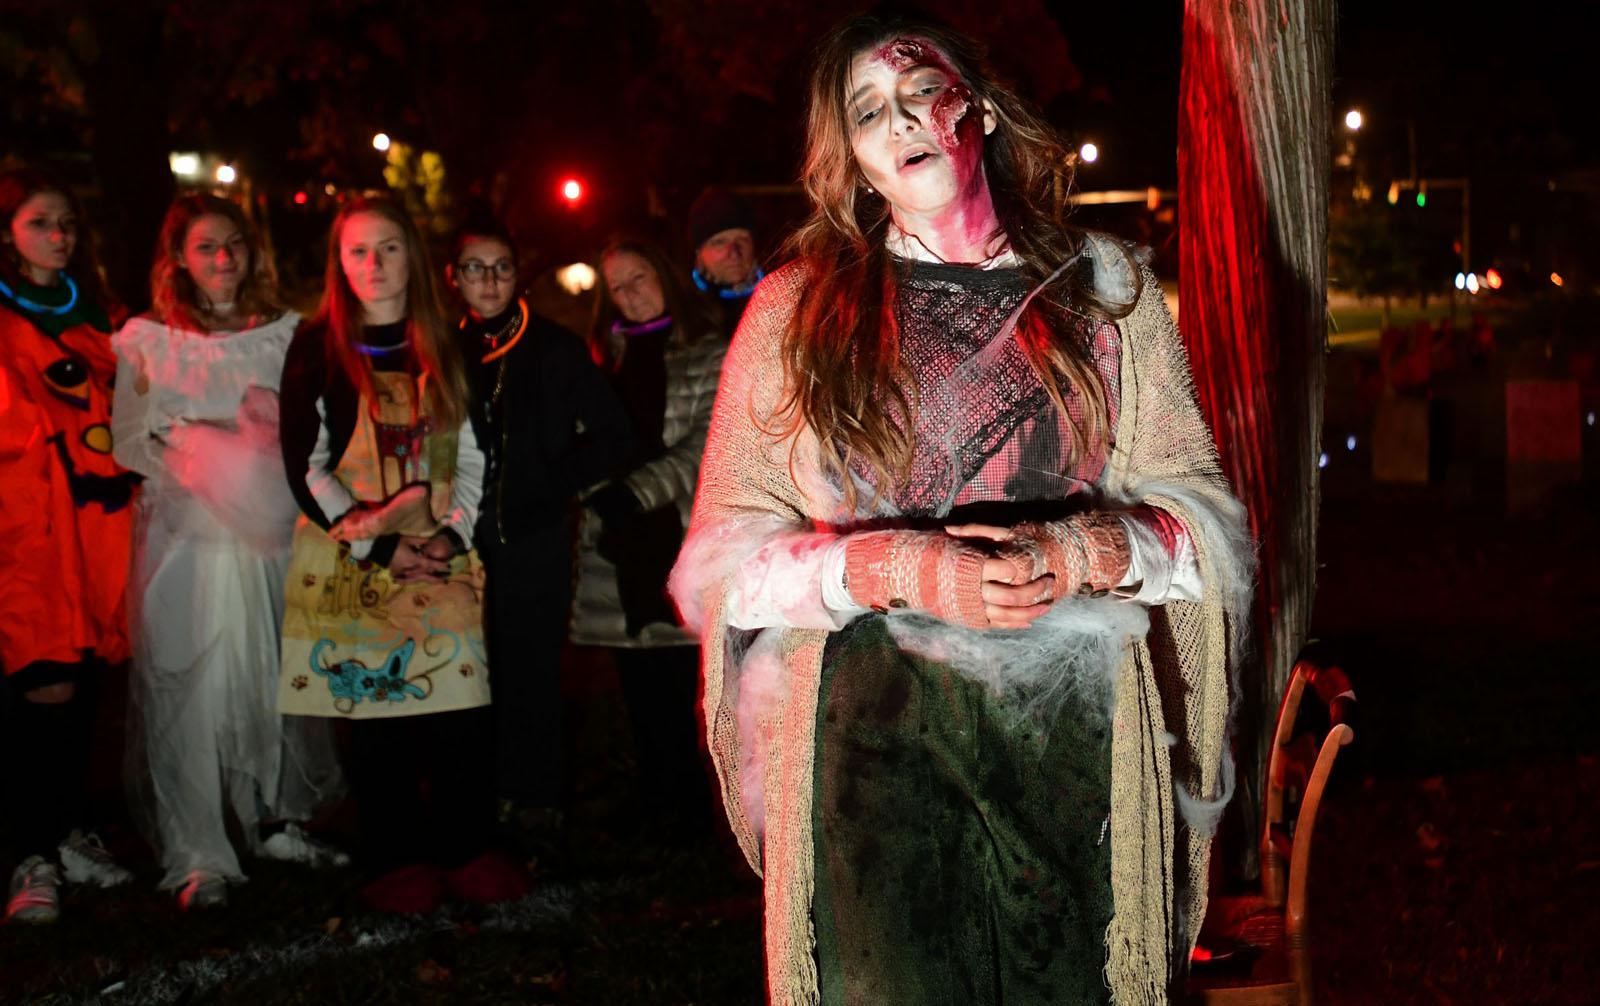 Haunted Hayride And Trail Of Terror This Month In Shelton